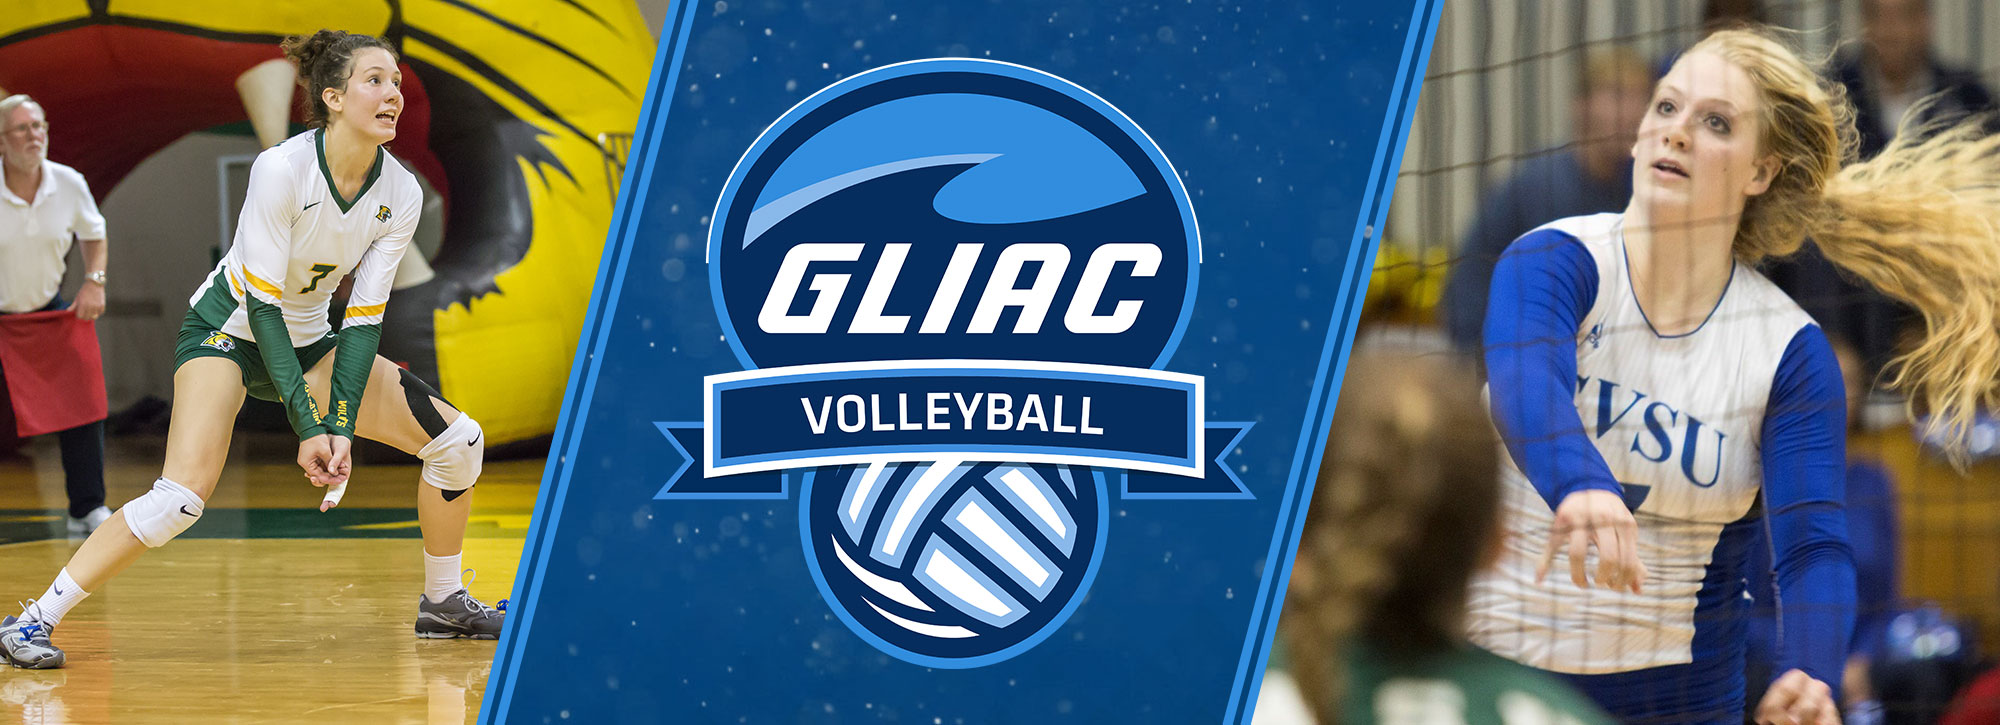 Northern Michigan's Antunes, Grand Valley State's Brower Earn GLIAC Volleyball Honors